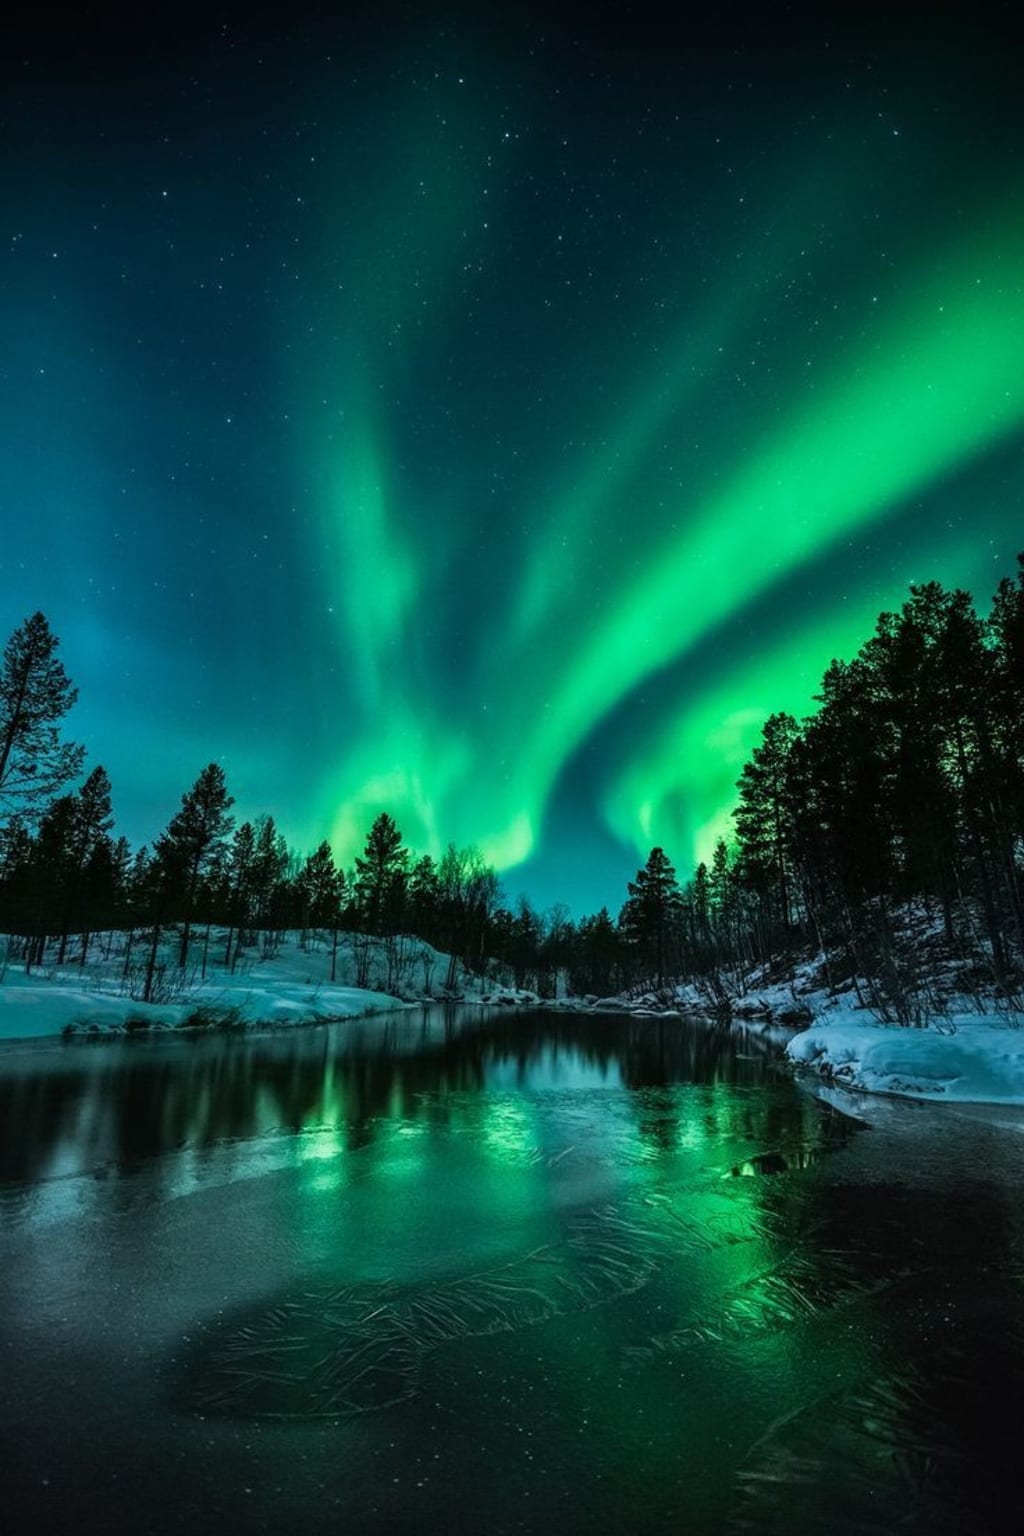 Northern Lights: These spectacular shots capture nature's most